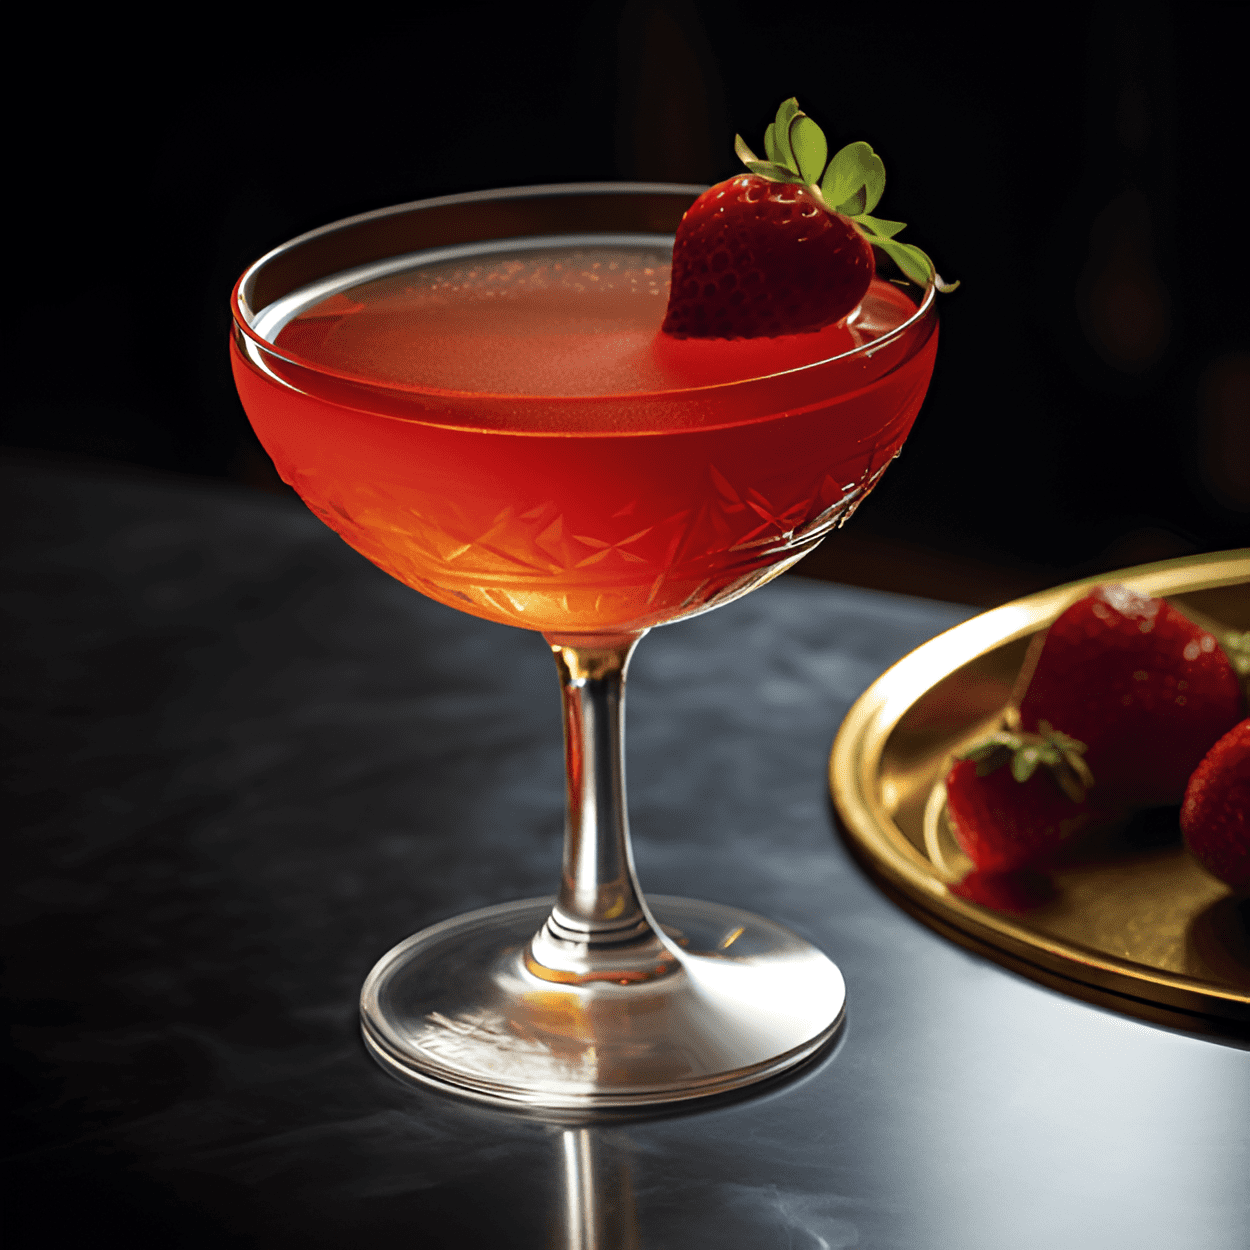 Bloodhound Cocktail Recipe - The Bloodhound cocktail is a strong, spirit-forward drink with a hint of fruitiness. The gin provides a robust base, while the sweet vermouth and dry vermouth balance each other out. The addition of fresh strawberries adds a touch of sweetness and a fruity aroma.